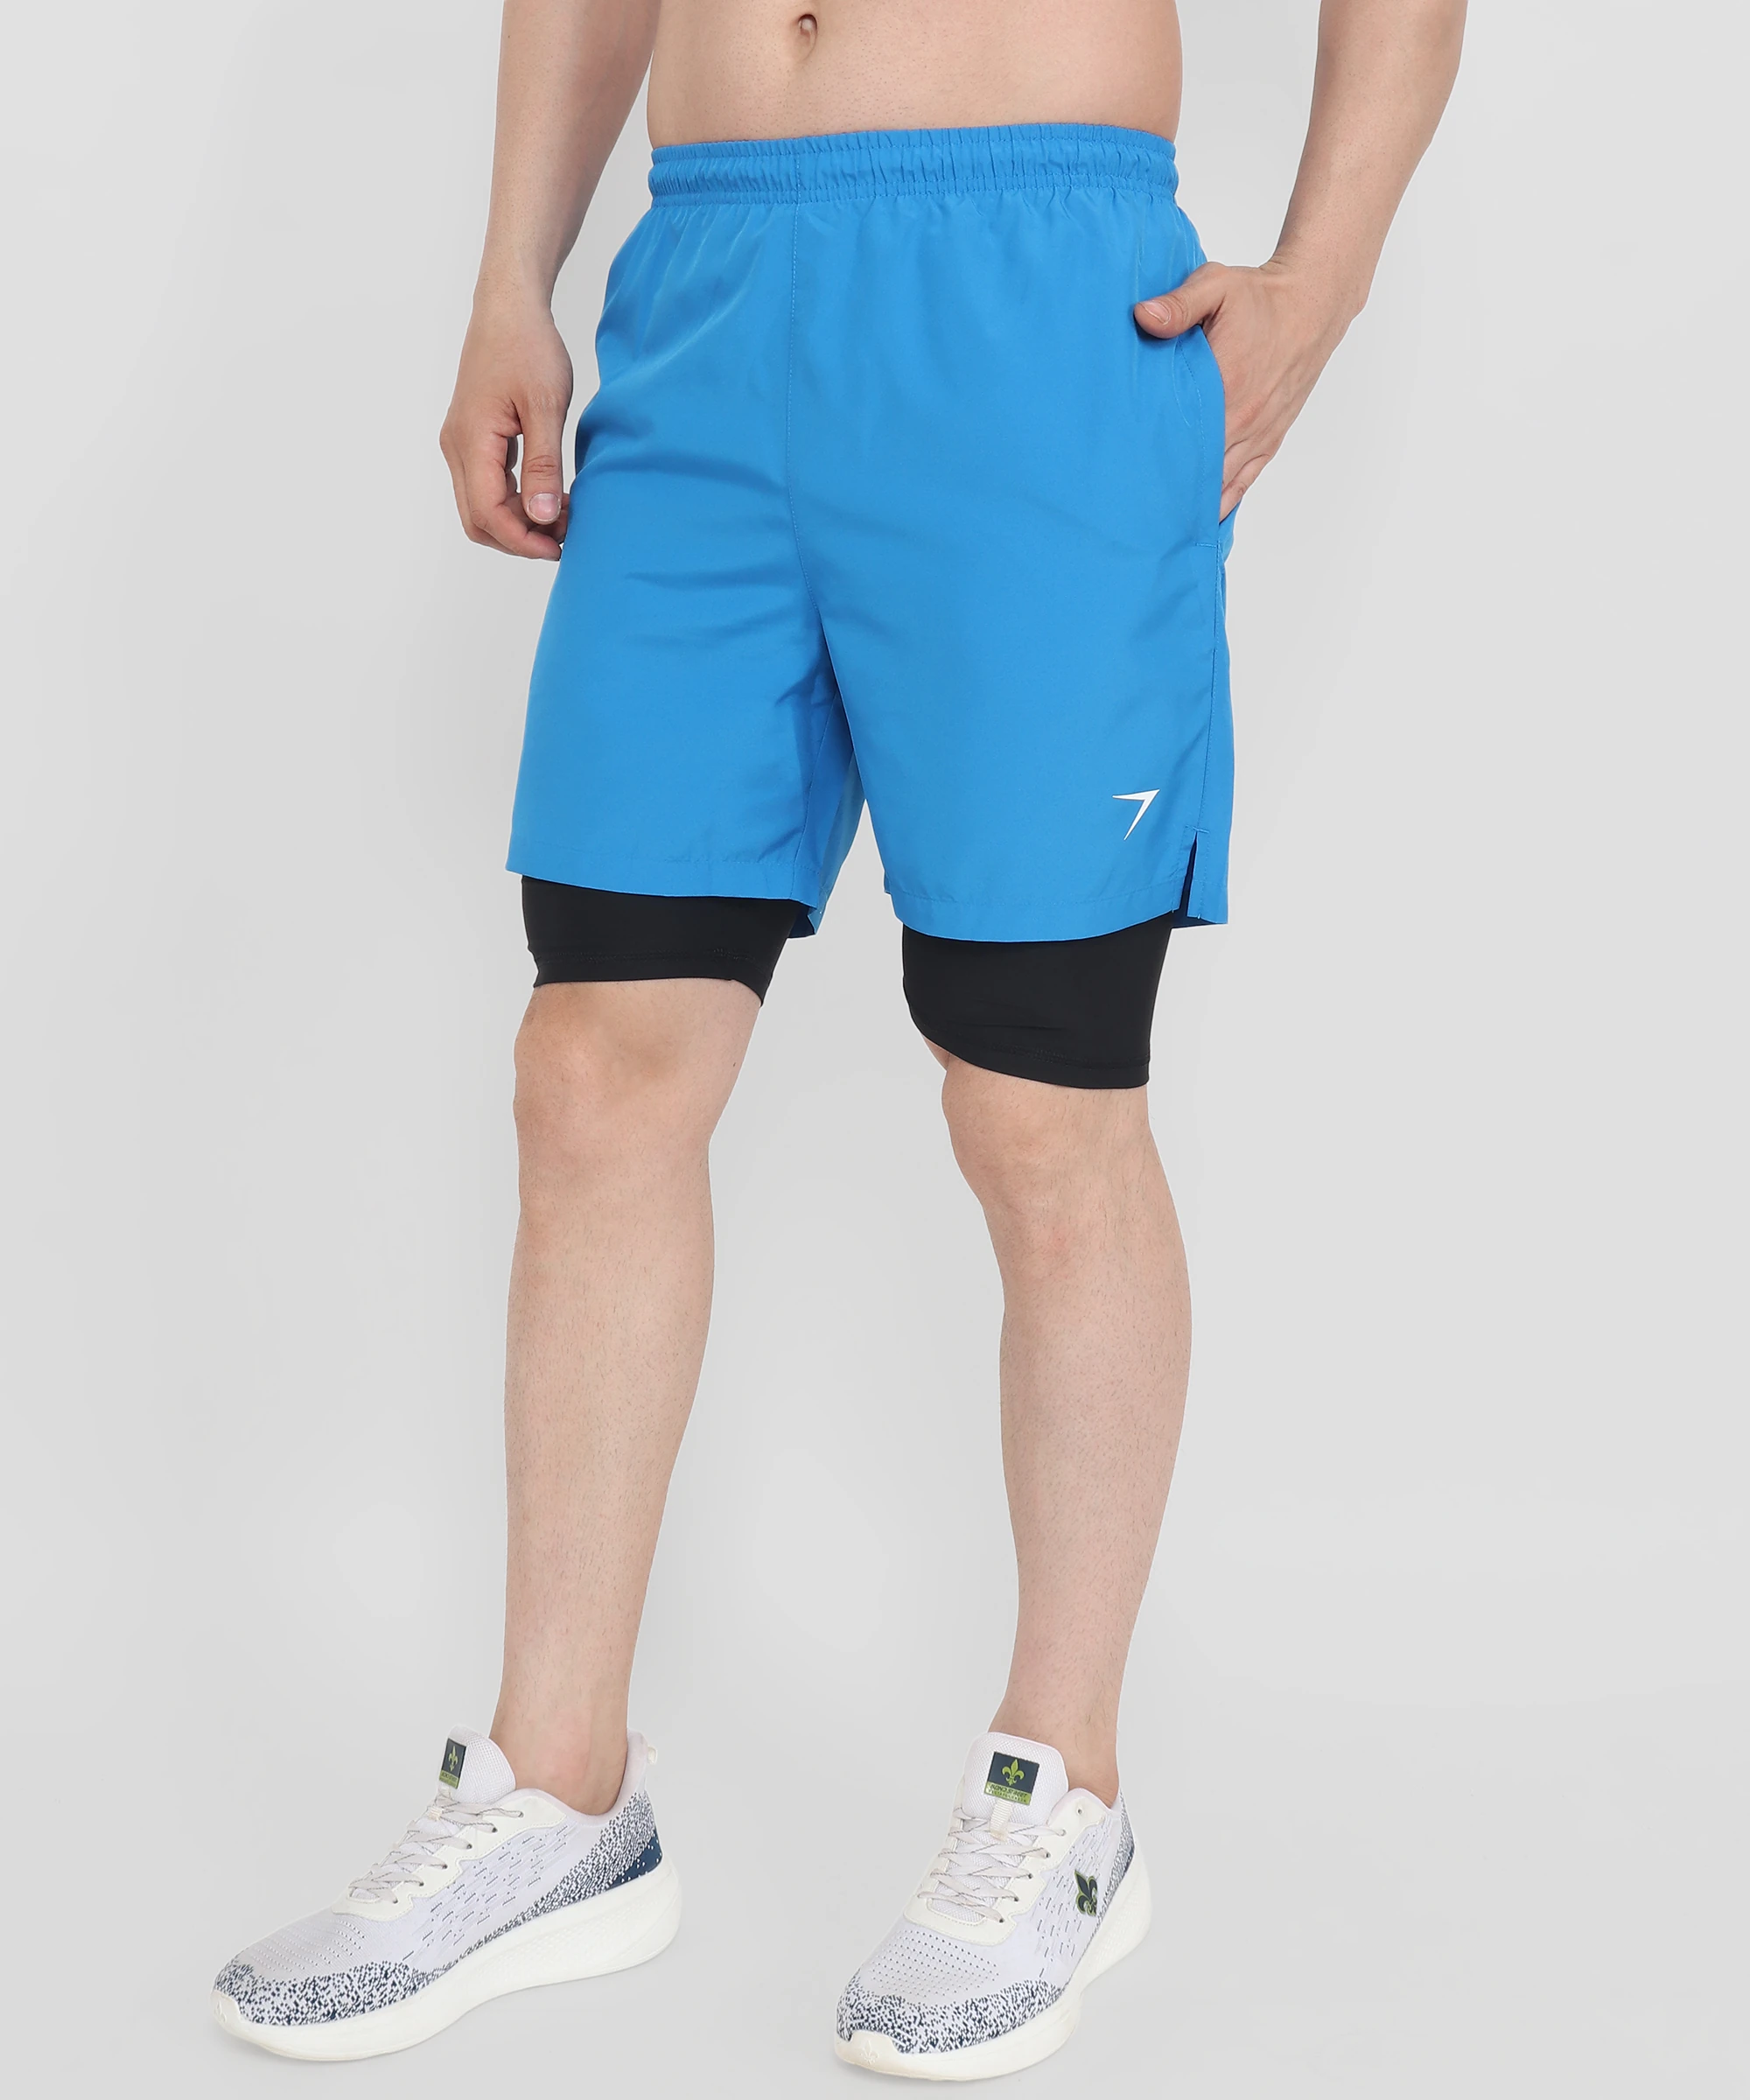 Mens Shorts Men Running Compression Sweatpants Gym Jogging Leggings  Basketball Football Shorts Fitness Tight Pants Outdoor Sport Clothes Set  P230505 From Musuo03, $17.16